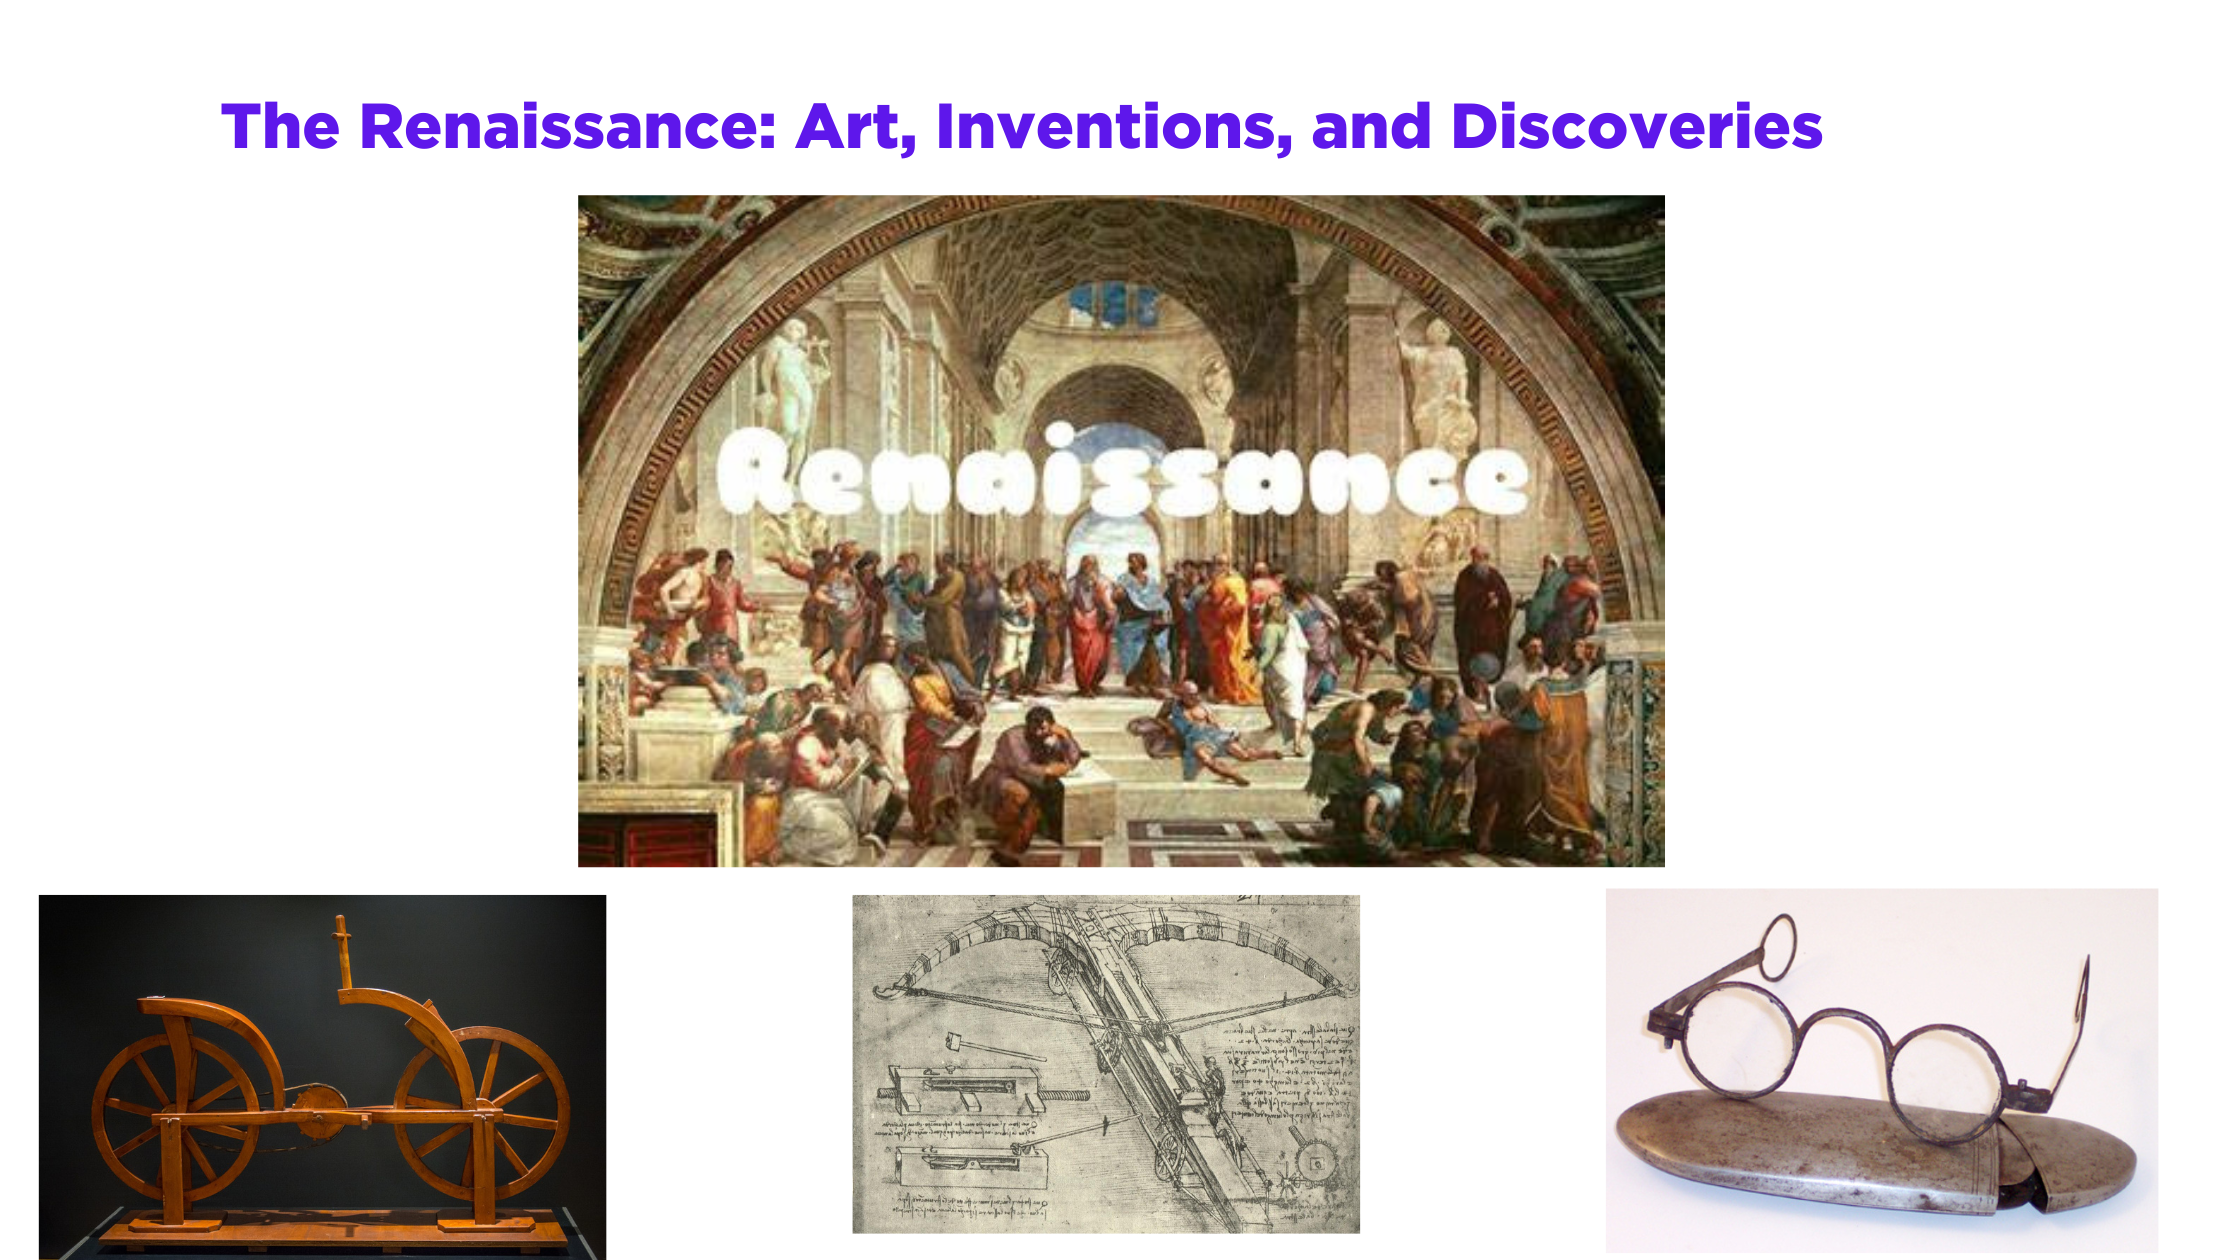 The Renaissance: Art, Inventions, and Discoveries